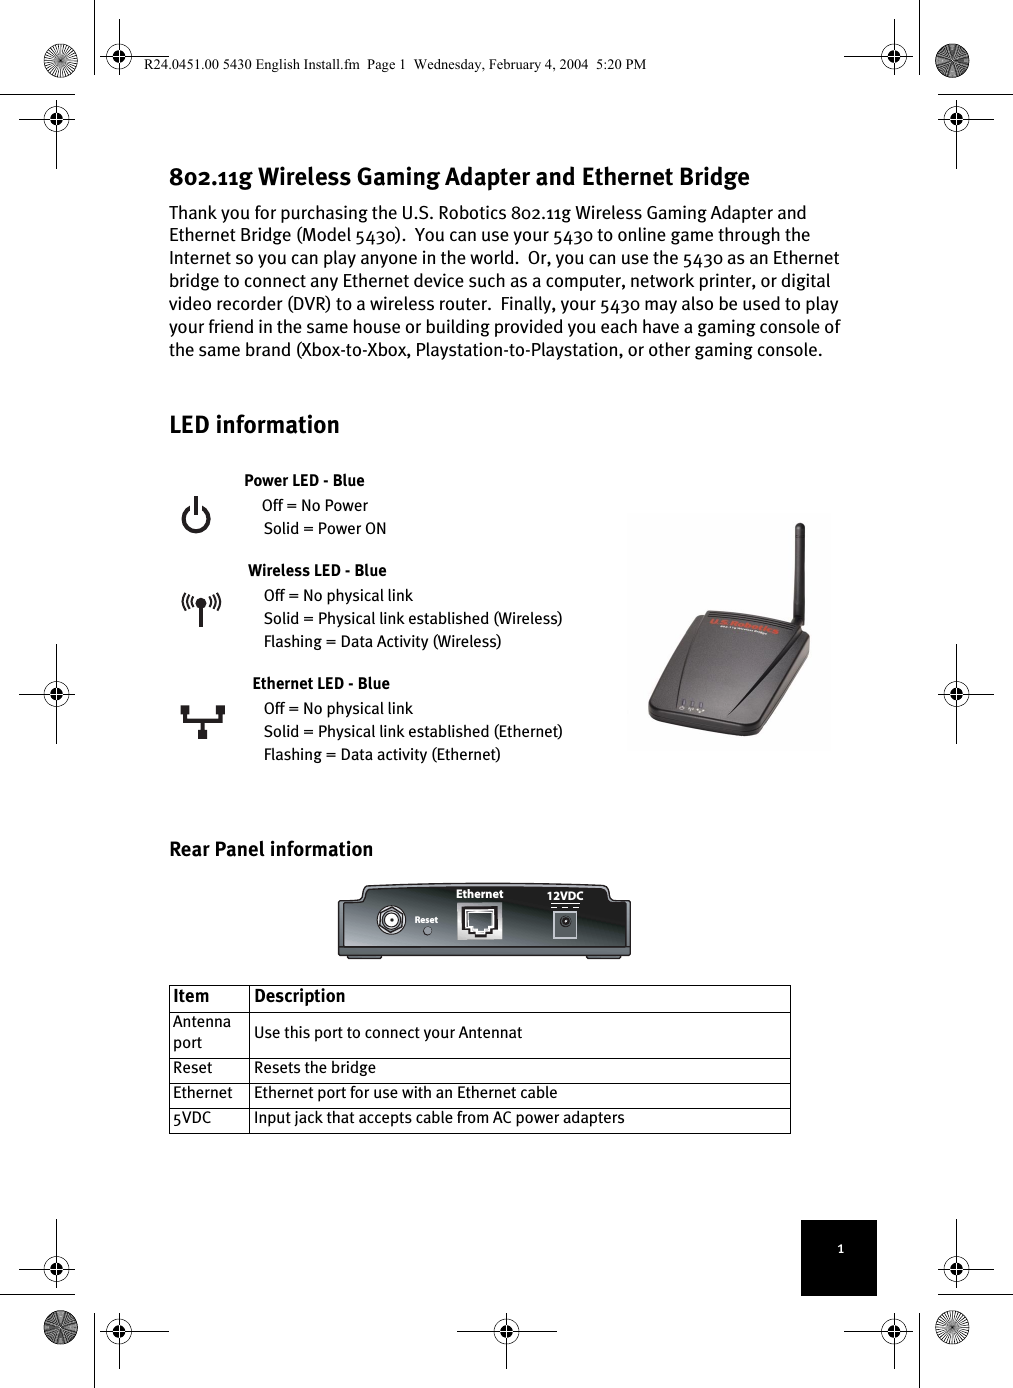 1802.11g Wireless Gaming Adapter and Ethernet BridgeThank you for purchasing the U.S. Robotics 802.11g Wireless Gaming Adapter and Ethernet Bridge (Model 5430).  You can use your 5430 to online game through the Internet so you can play anyone in the world.  Or, you can use the 5430 as an Ethernet bridge to connect any Ethernet device such as a computer, network printer, or digital video recorder (DVR) to a wireless router.  Finally, your 5430 may also be used to play your friend in the same house or building provided you each have a gaming console of the same brand (Xbox-to-Xbox, Playstation-to-Playstation, or other gaming console.  LED informationPower LED - BlueOff = No PowerSolid = Power ONWireless LED - BlueOff = No physical linkSolid = Physical link established (Wireless)Flashing = Data Activity (Wireless)Ethernet LED - BlueOff = No physical linkSolid = Physical link established (Ethernet)Flashing = Data activity (Ethernet)Rear Panel informationItem Description Antenna port Use this port to connect your AntennatReset Resets the bridgeEthernet Ethernet port for use with an Ethernet cable5VDC Input jack that accepts cable from AC power adaptersEthernetReset12VDCR24.0451.00 5430 English Install.fm  Page 1  Wednesday, February 4, 2004  5:20 PM